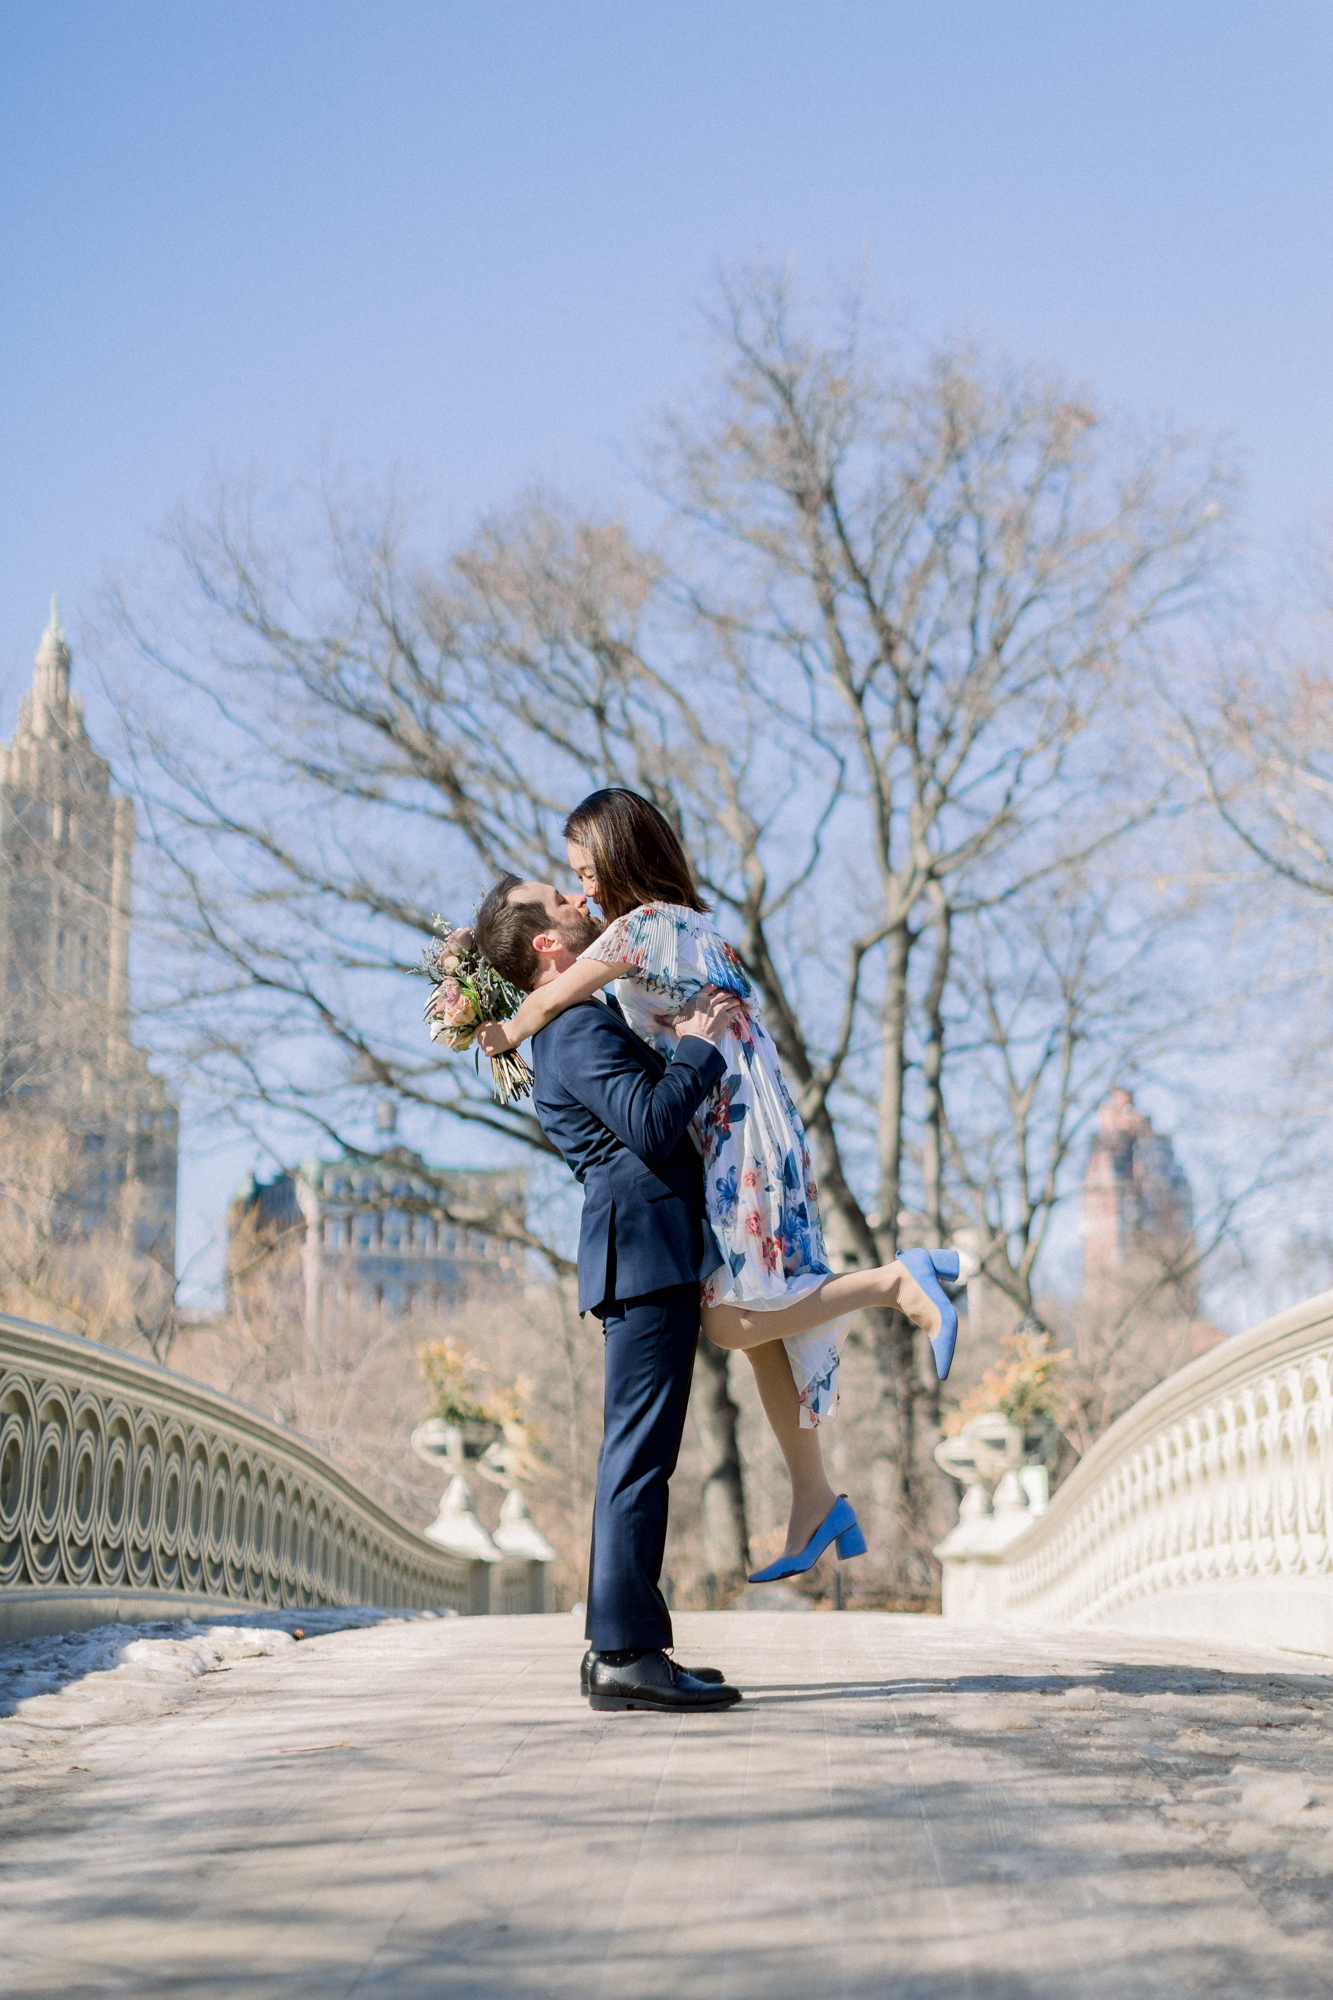 Timeless Central Park Wedding Photos in Wintery NYC